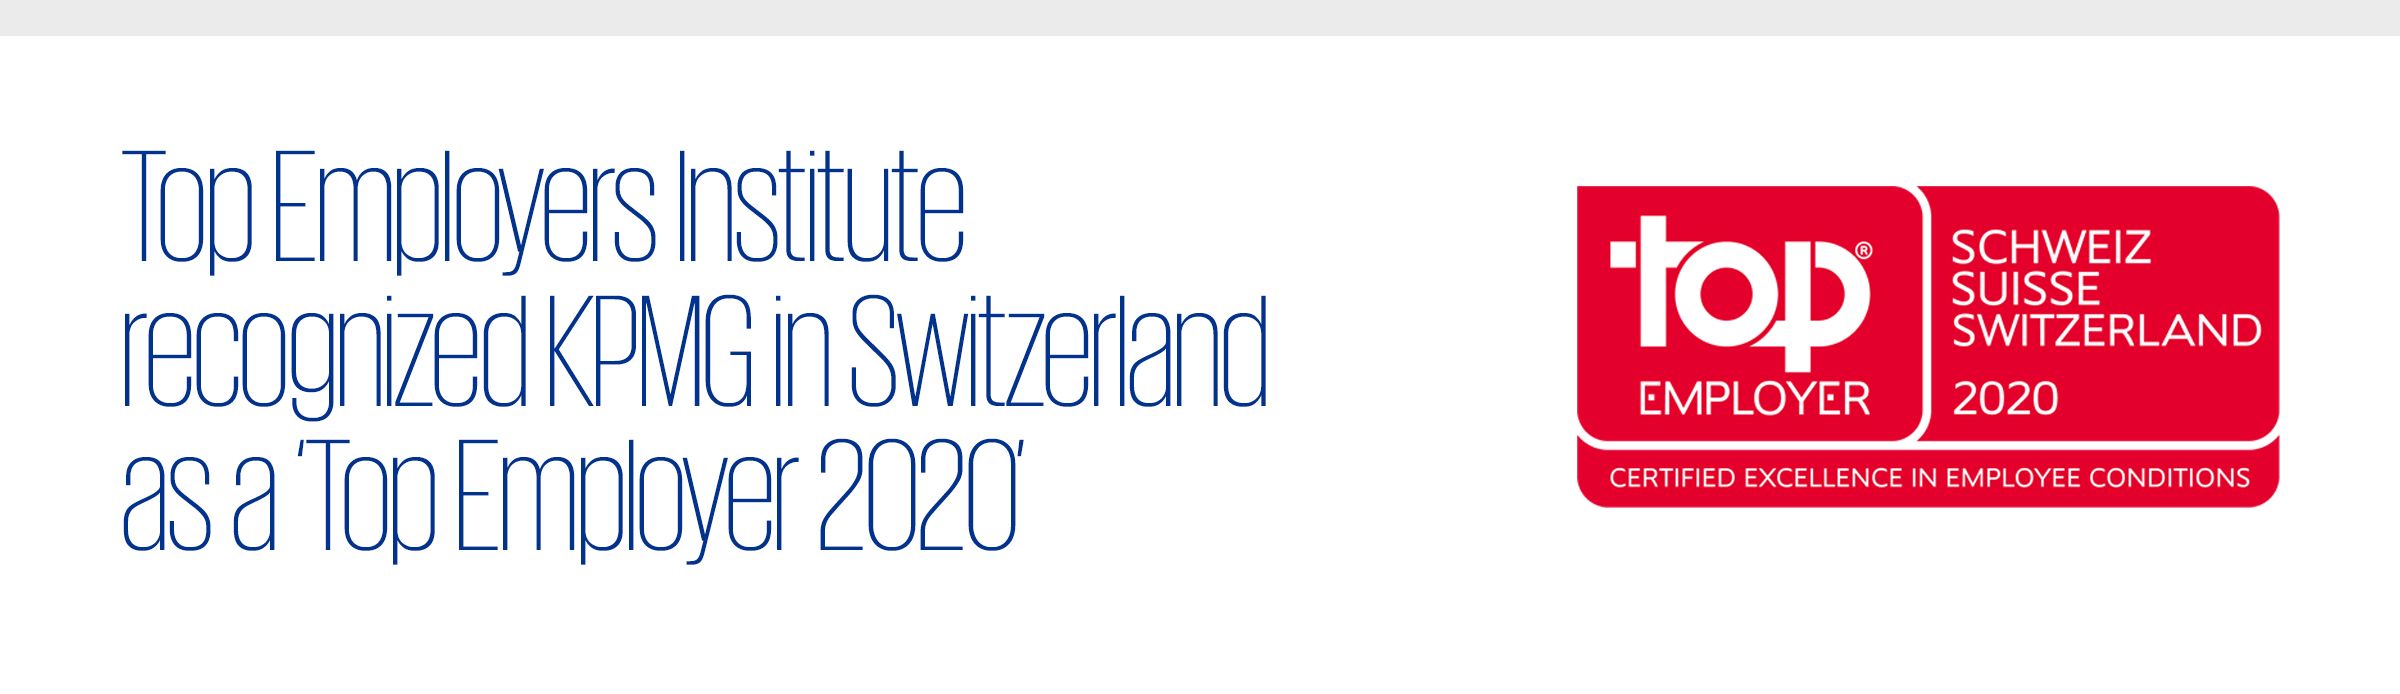 Top Employers Institute recognized KPMG in Switzerland as a ‘Top Employer 2020’